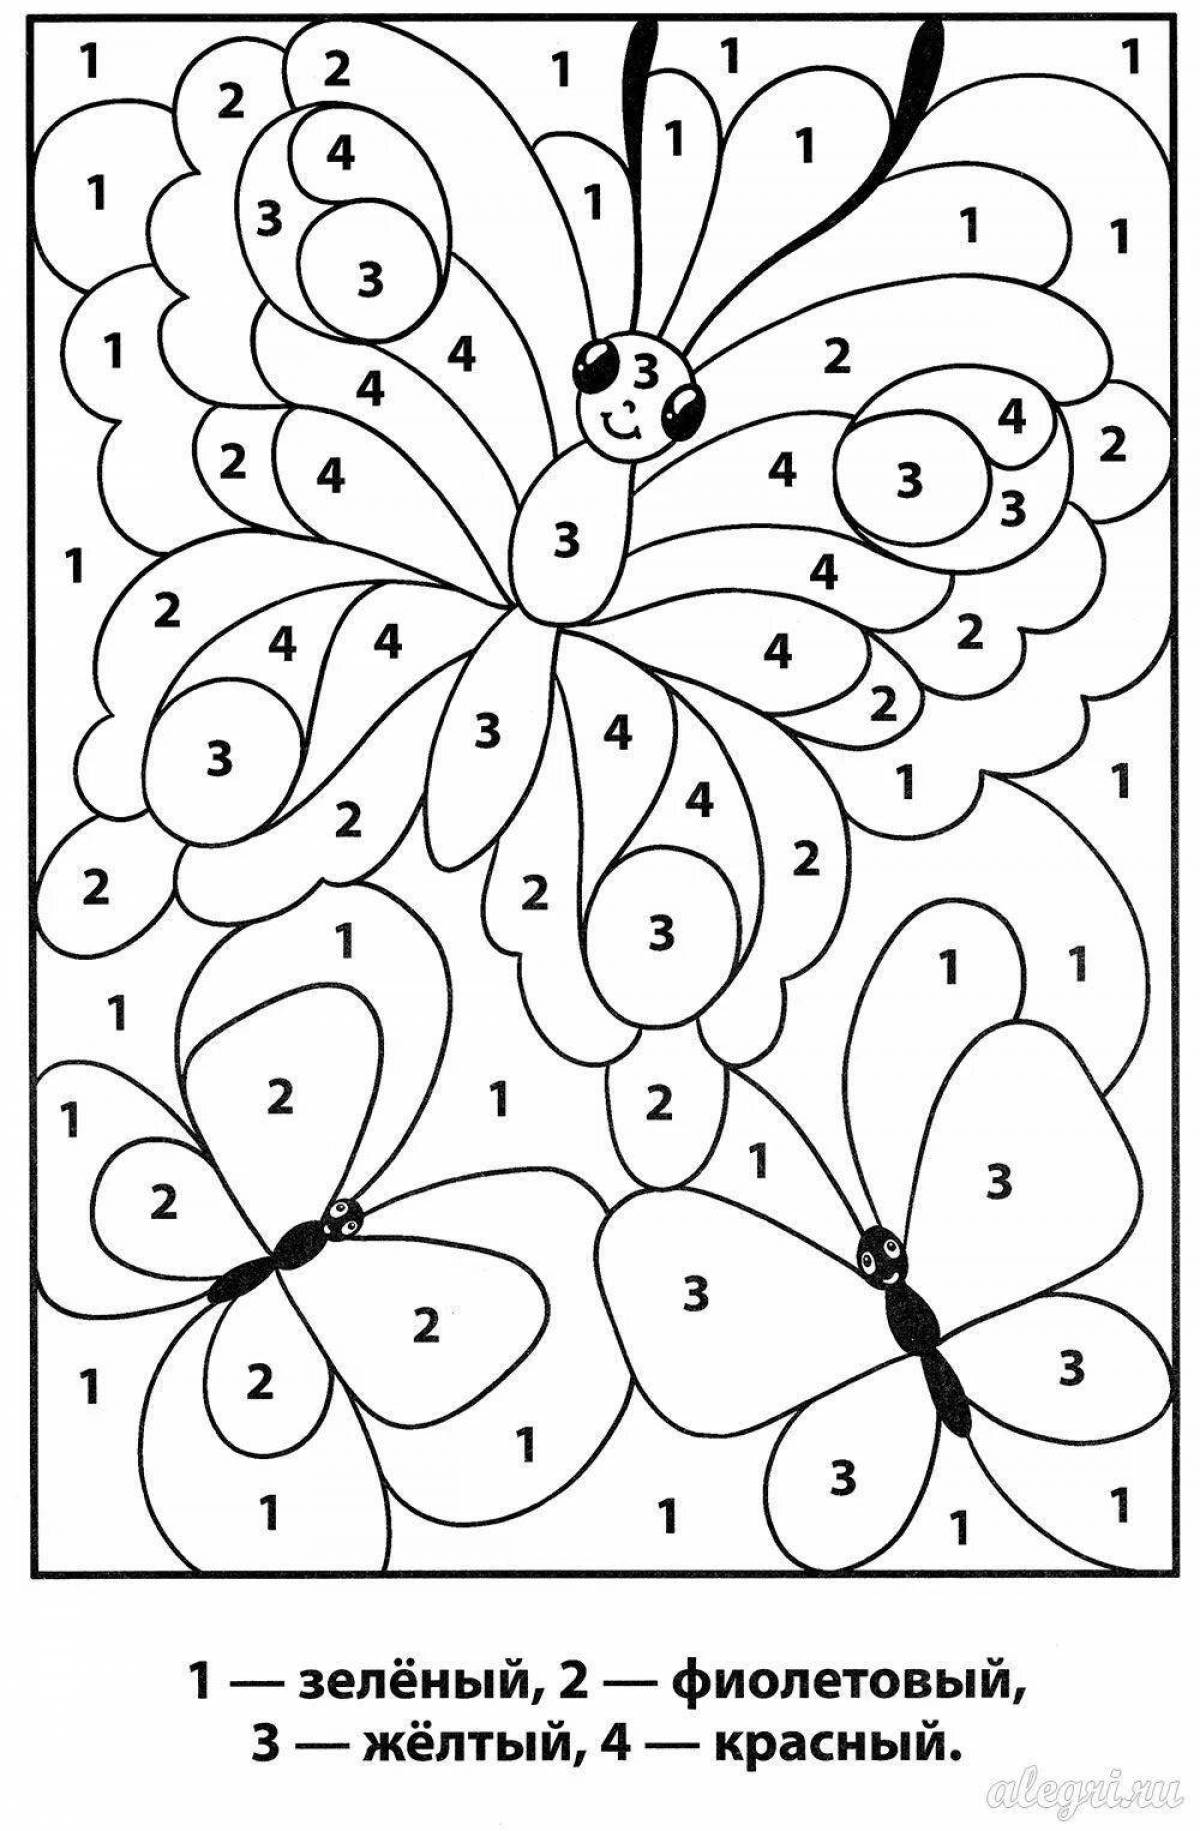 7th grade playful coloring page